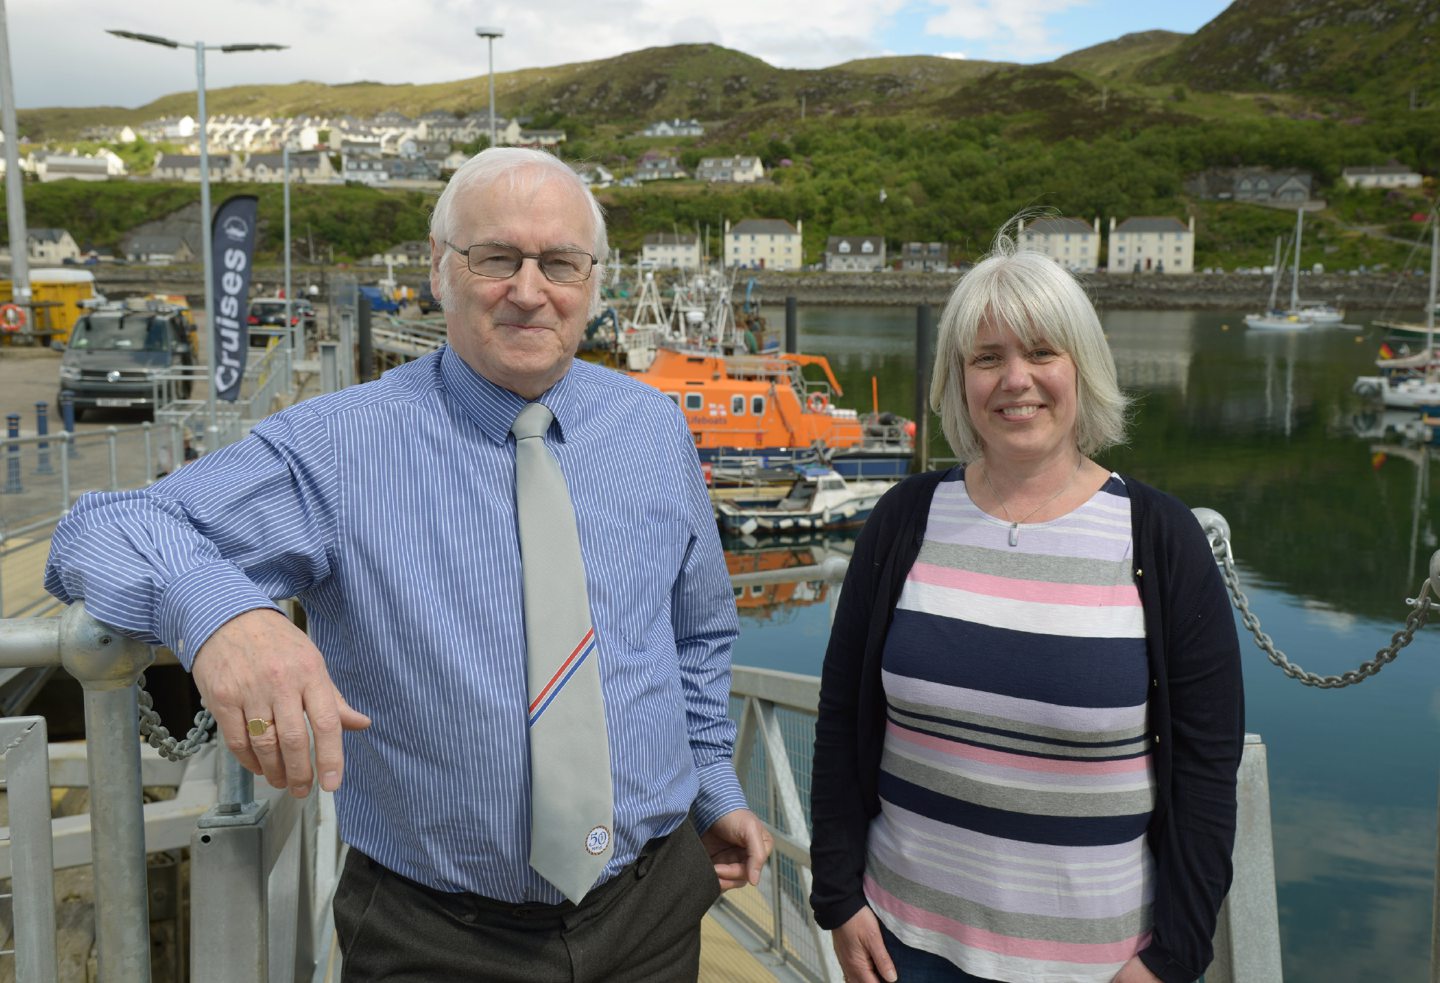 A 50-berth marina has been one of the developments at Mallaig harbour